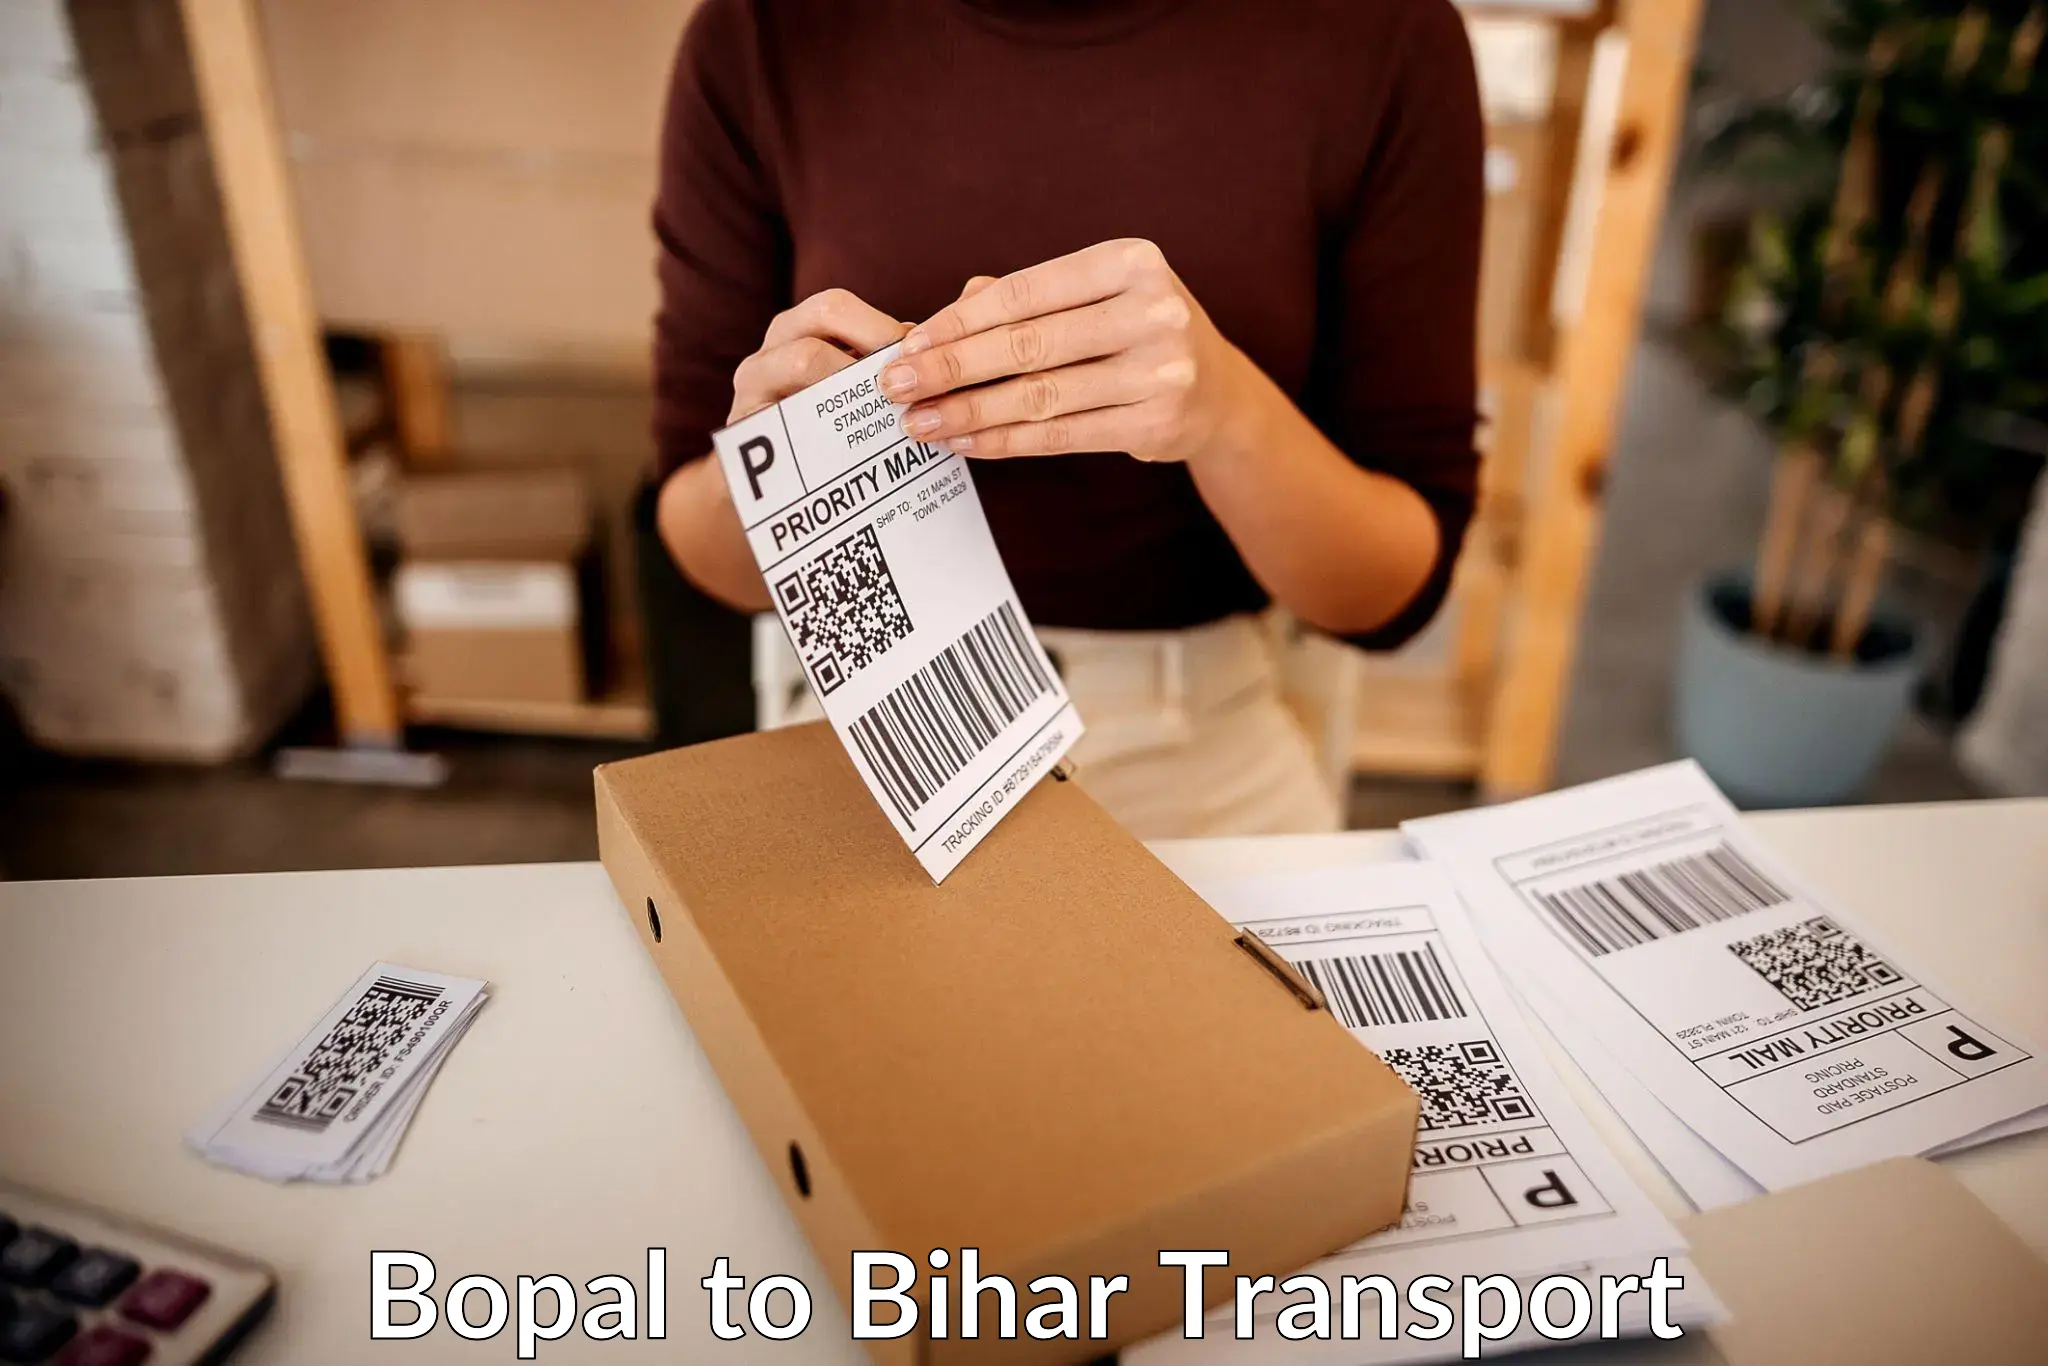 Truck transport companies in India Bopal to Kaluahi